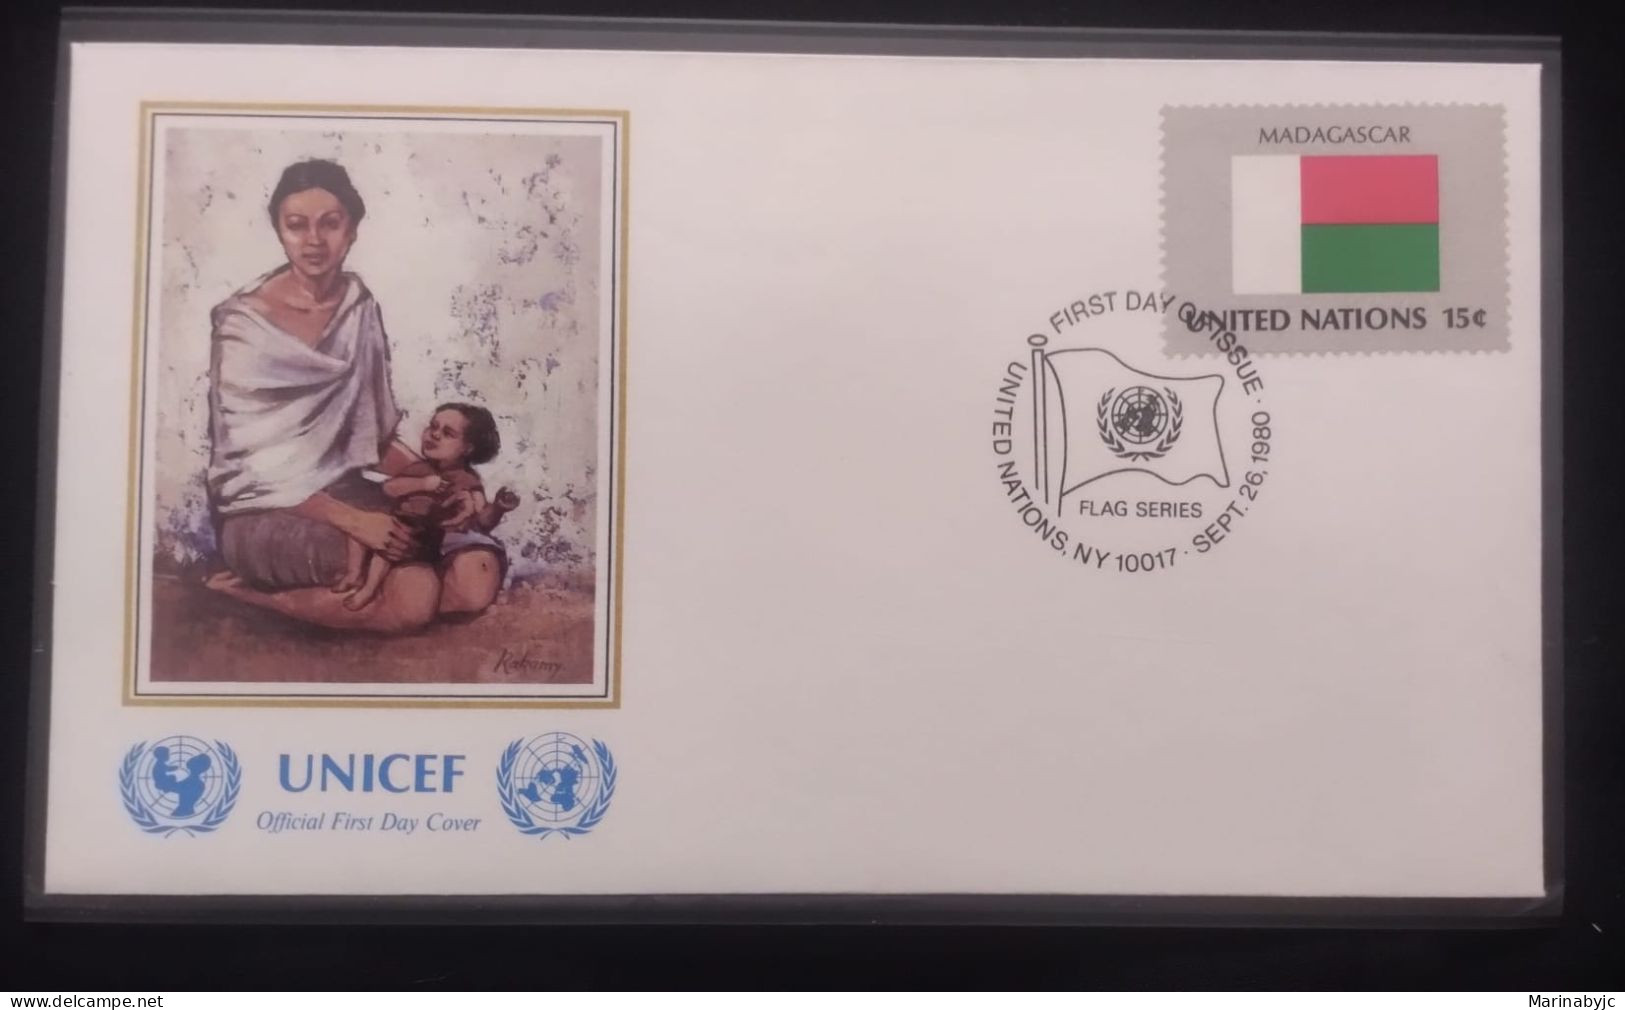 EL)1980 UNITED NATIONS, NATIONAL FLAG OF THE MEMBER COUNTRIES, MADAGASCAR, UNICEF, MOTHER AND BABY, FDC - Ongebruikt